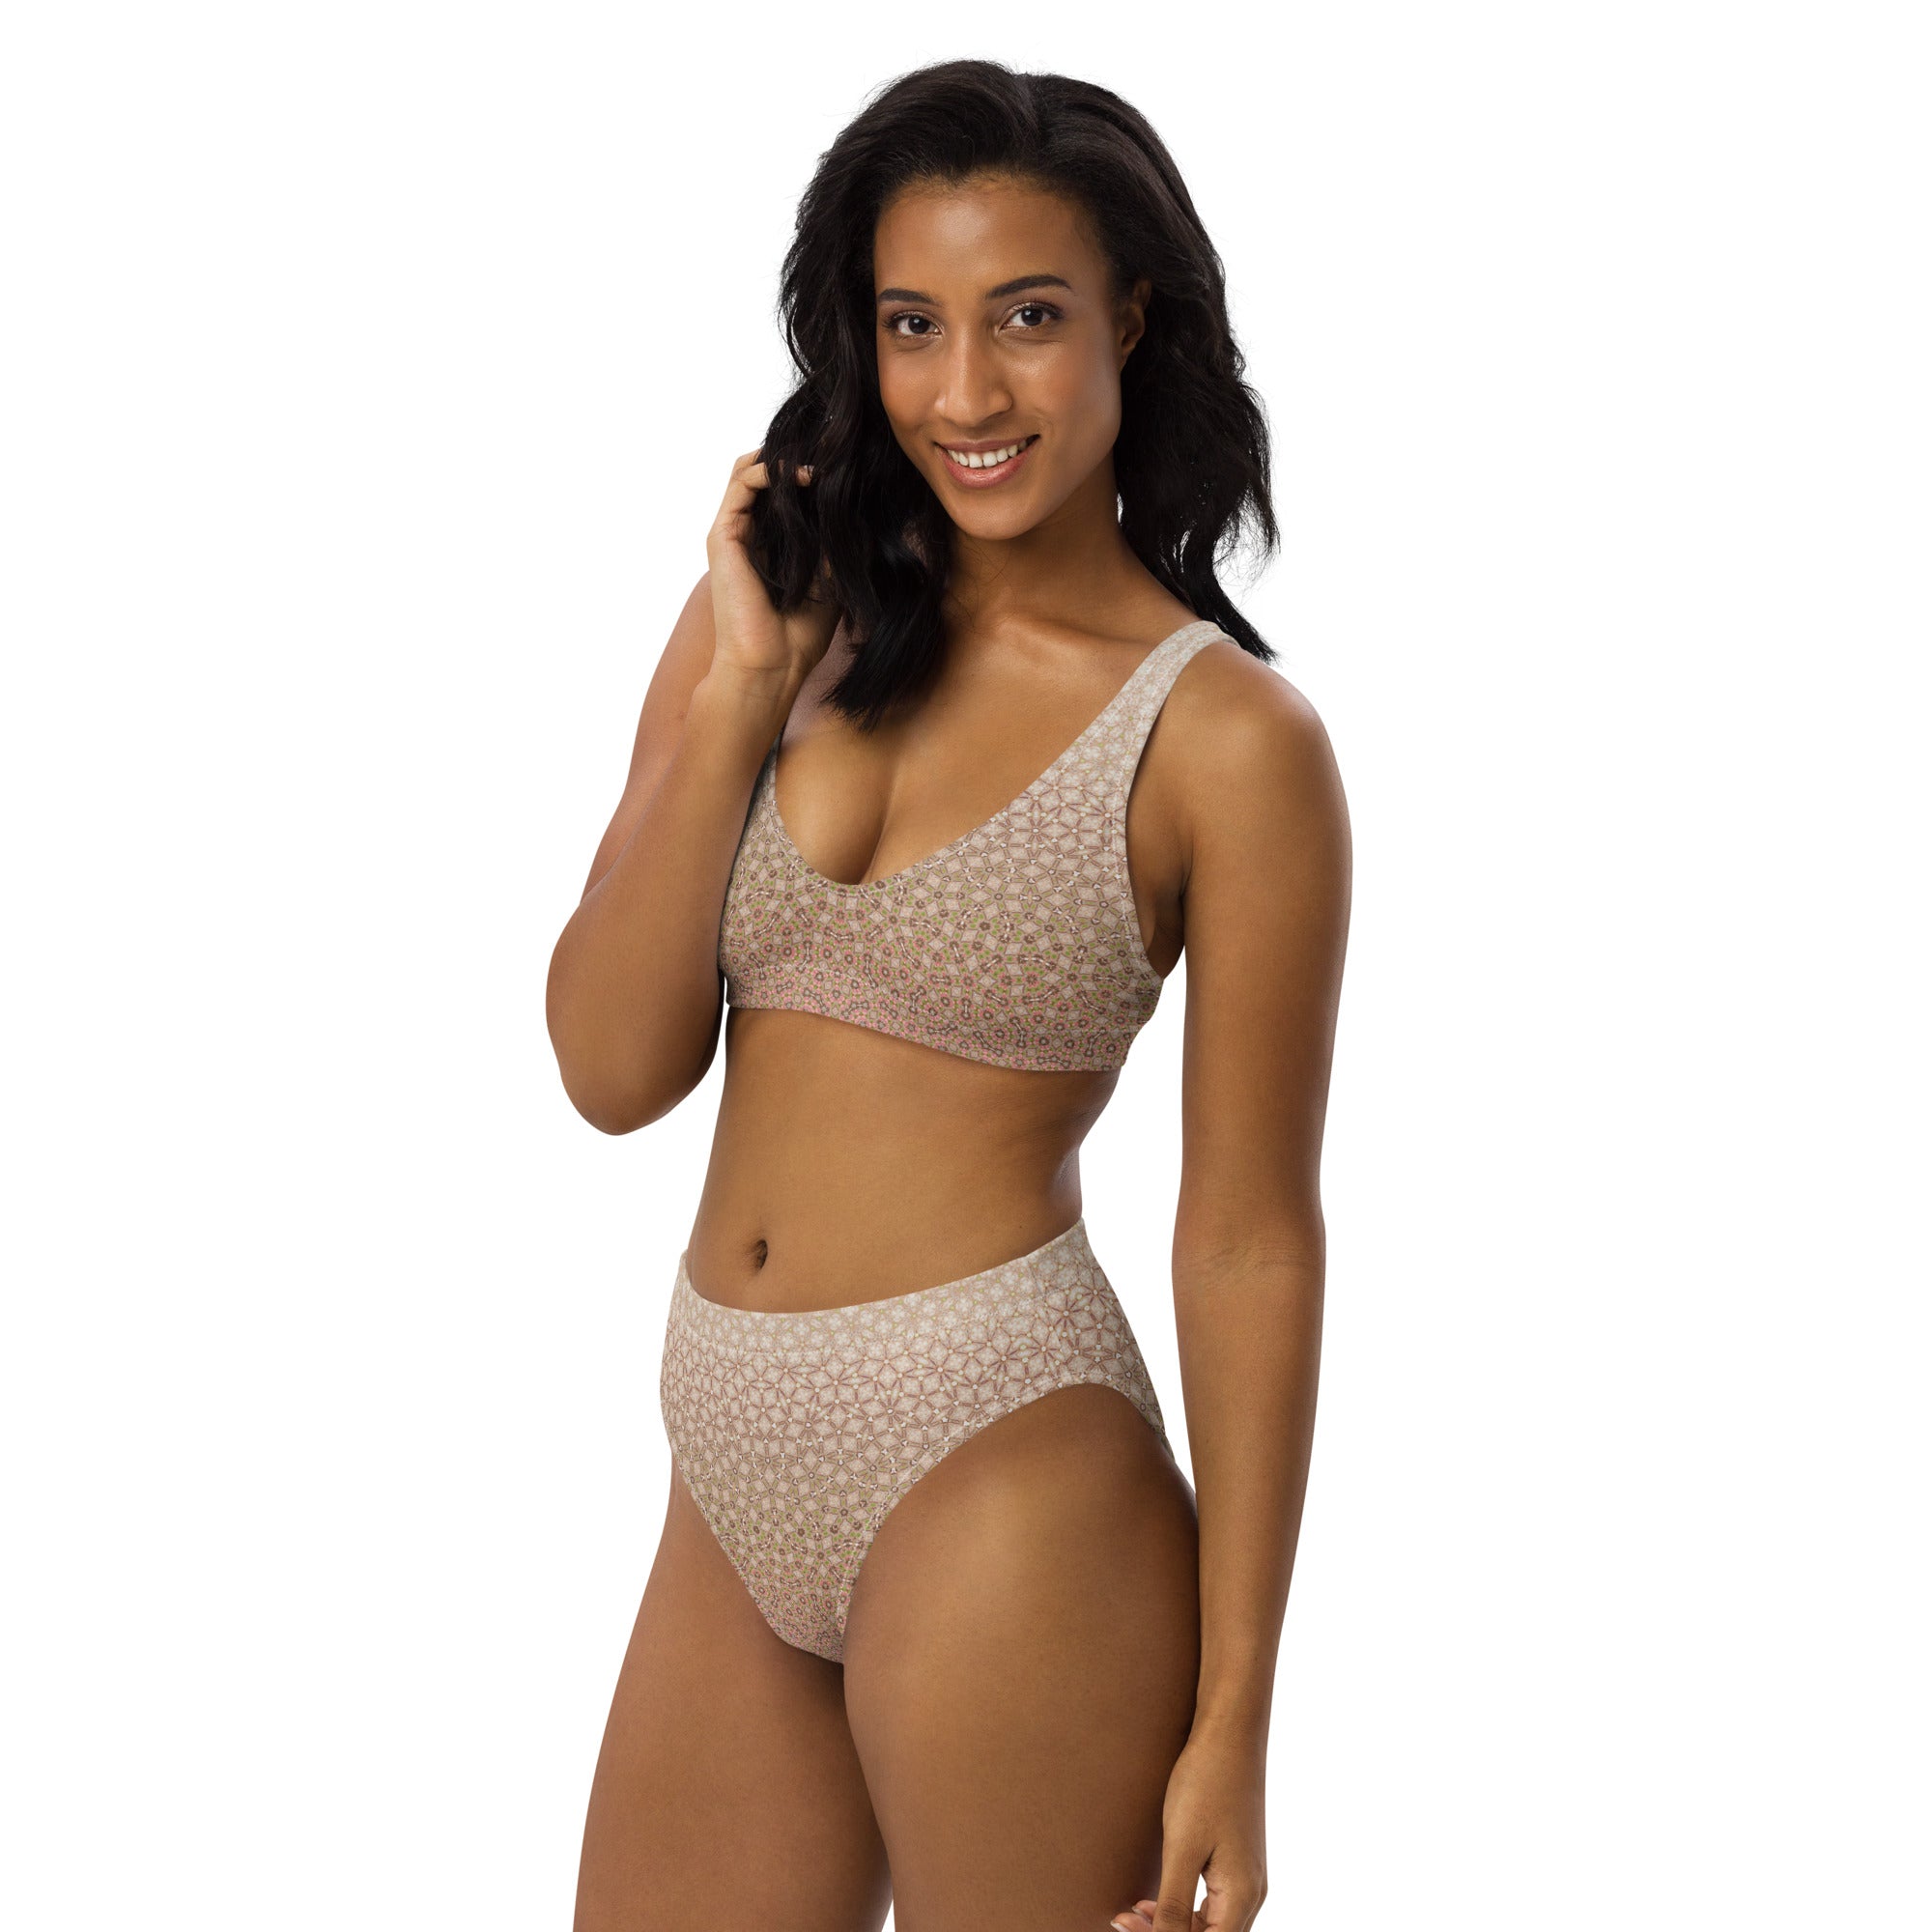 Delicate Pale Pink & Beige Rosy patterned Recycled high-waisted bikini, by Sensus Studio Design